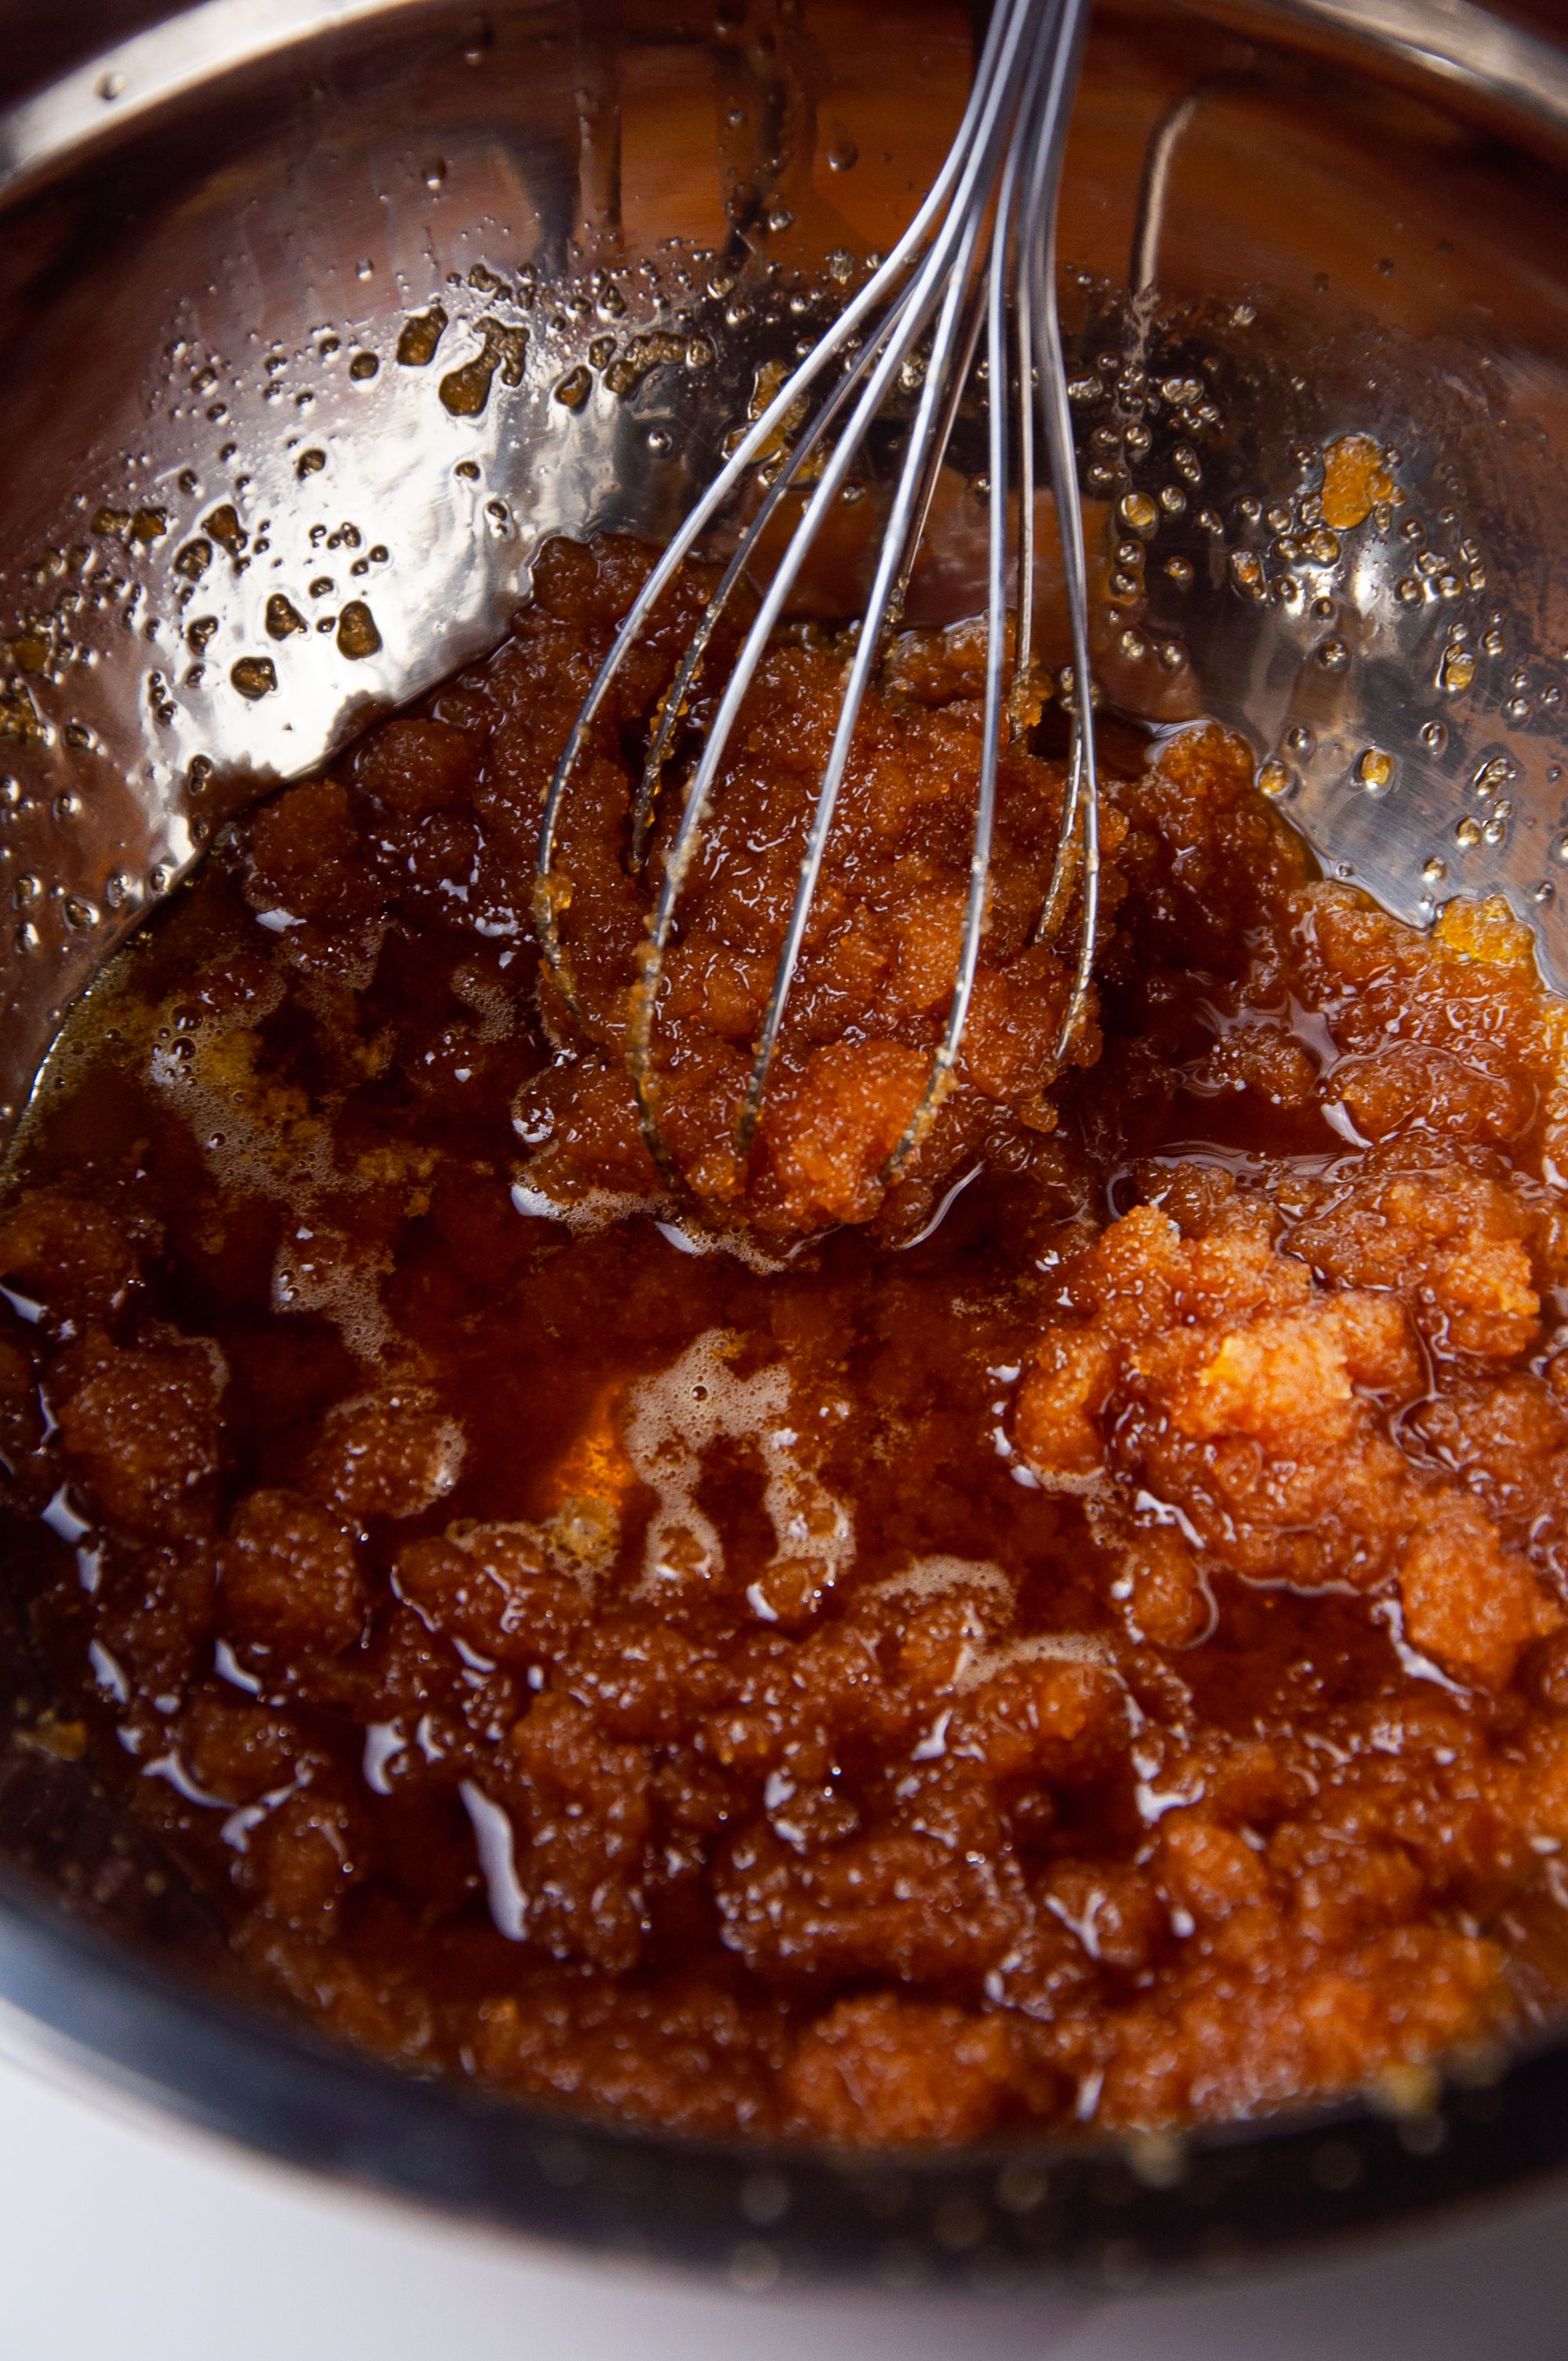 Combining the golden-brown butter with salt and sugar mixture